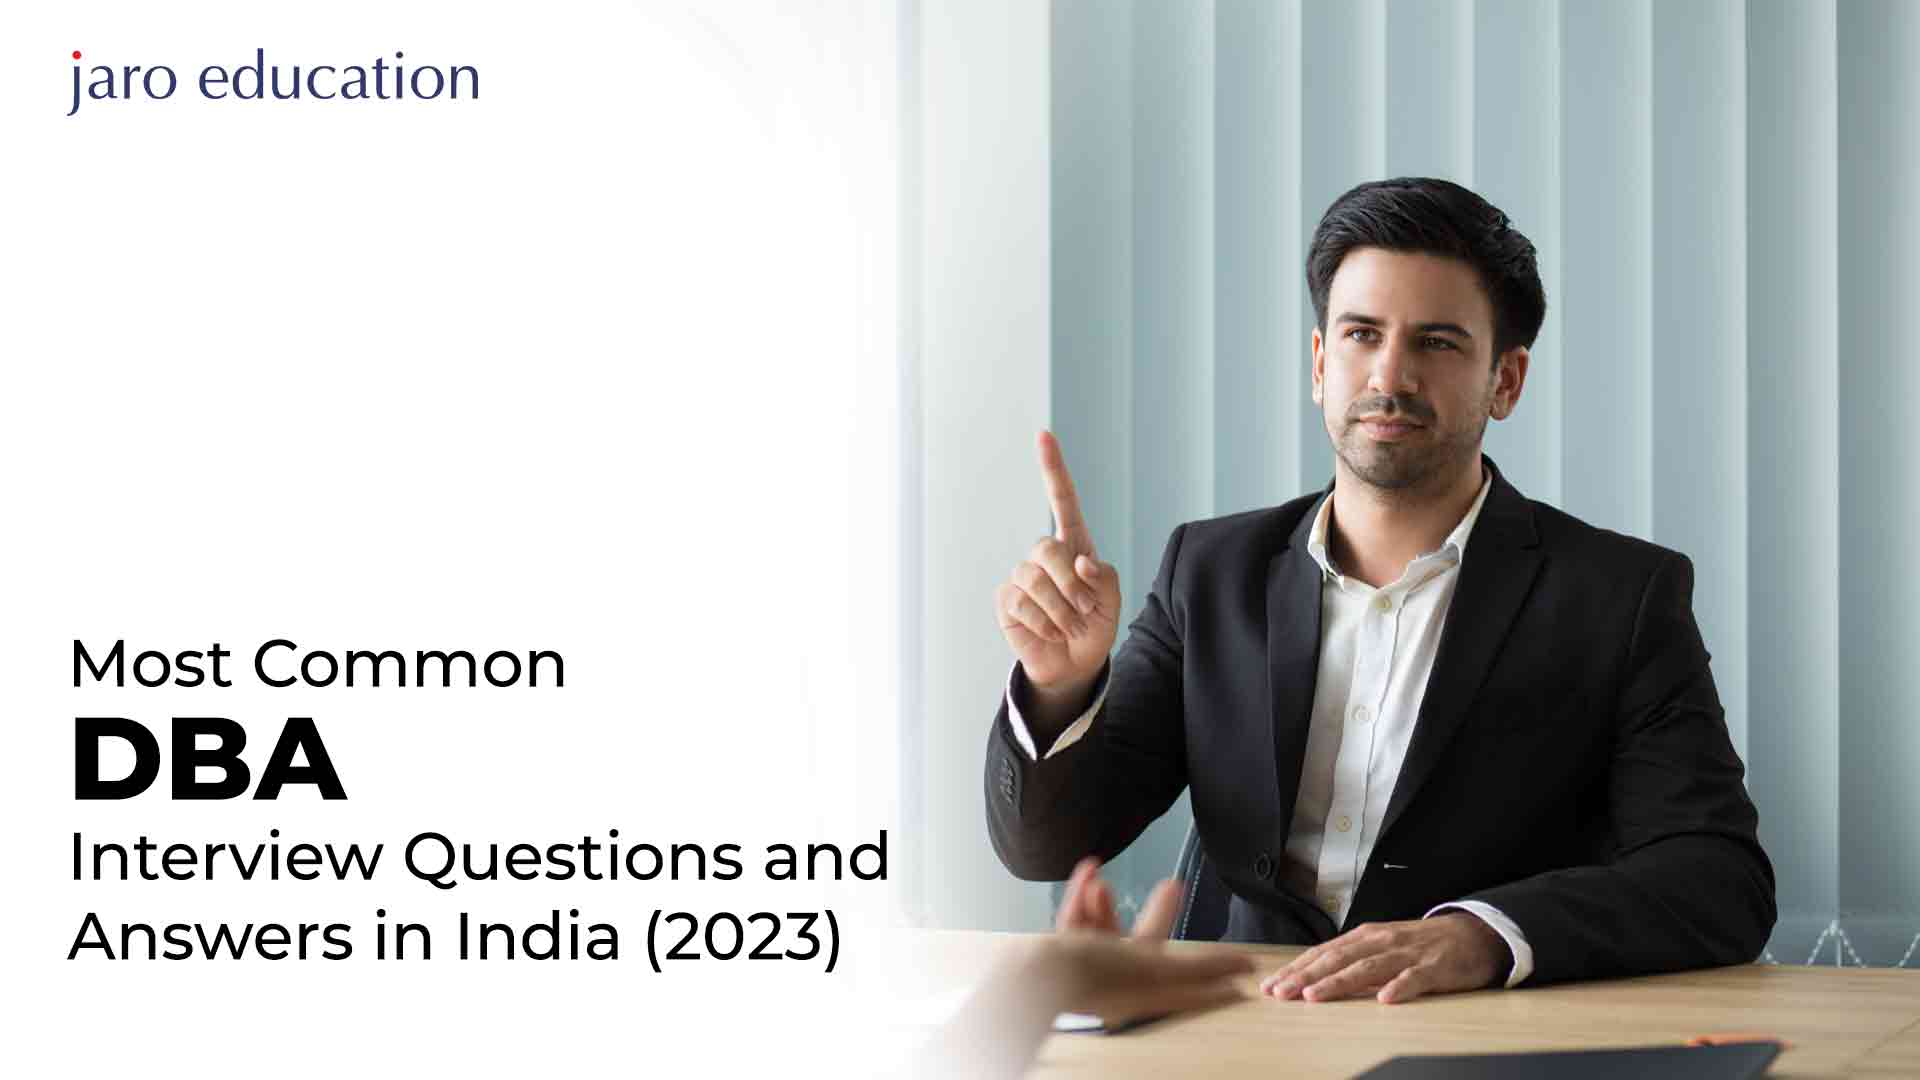 Most-Common-DBA-Interview-Questions-and-Answers-in-India jaro